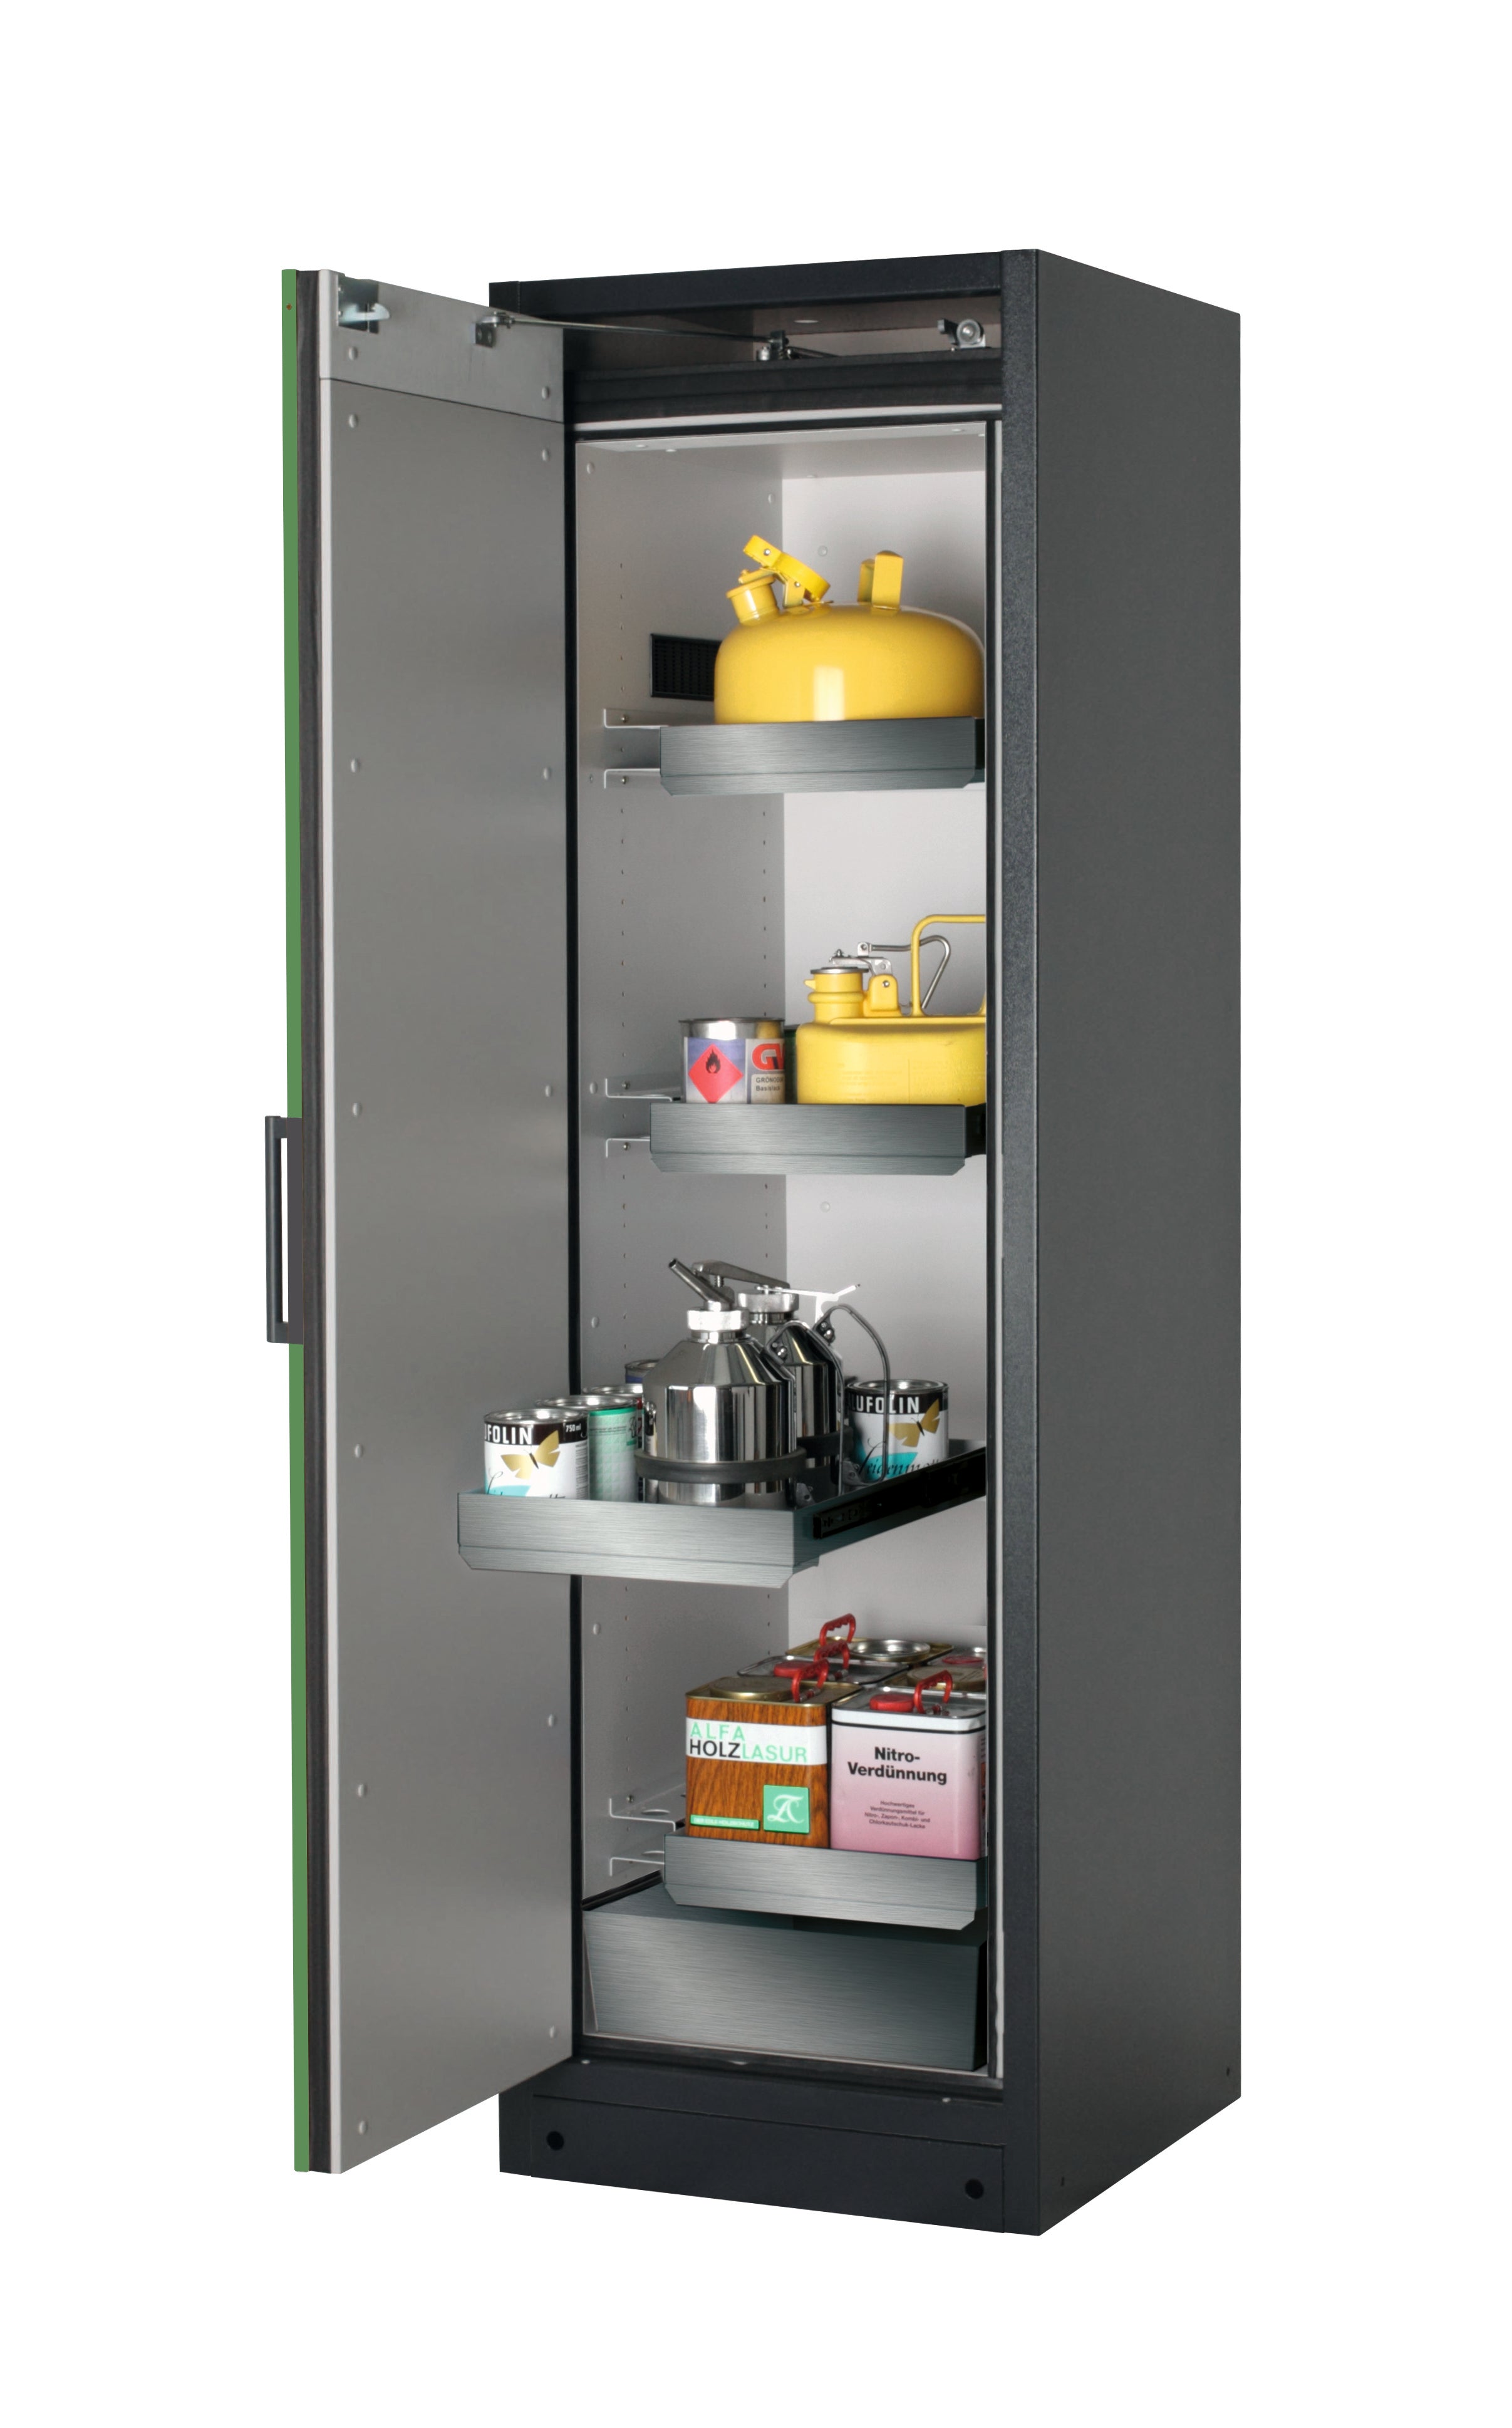 Type 90 safety storage cabinet Q-CLASSIC-90 model Q90.195.060 in reseda green RAL 6011 with 3x drawer (standard) (stainless steel 1.4301),